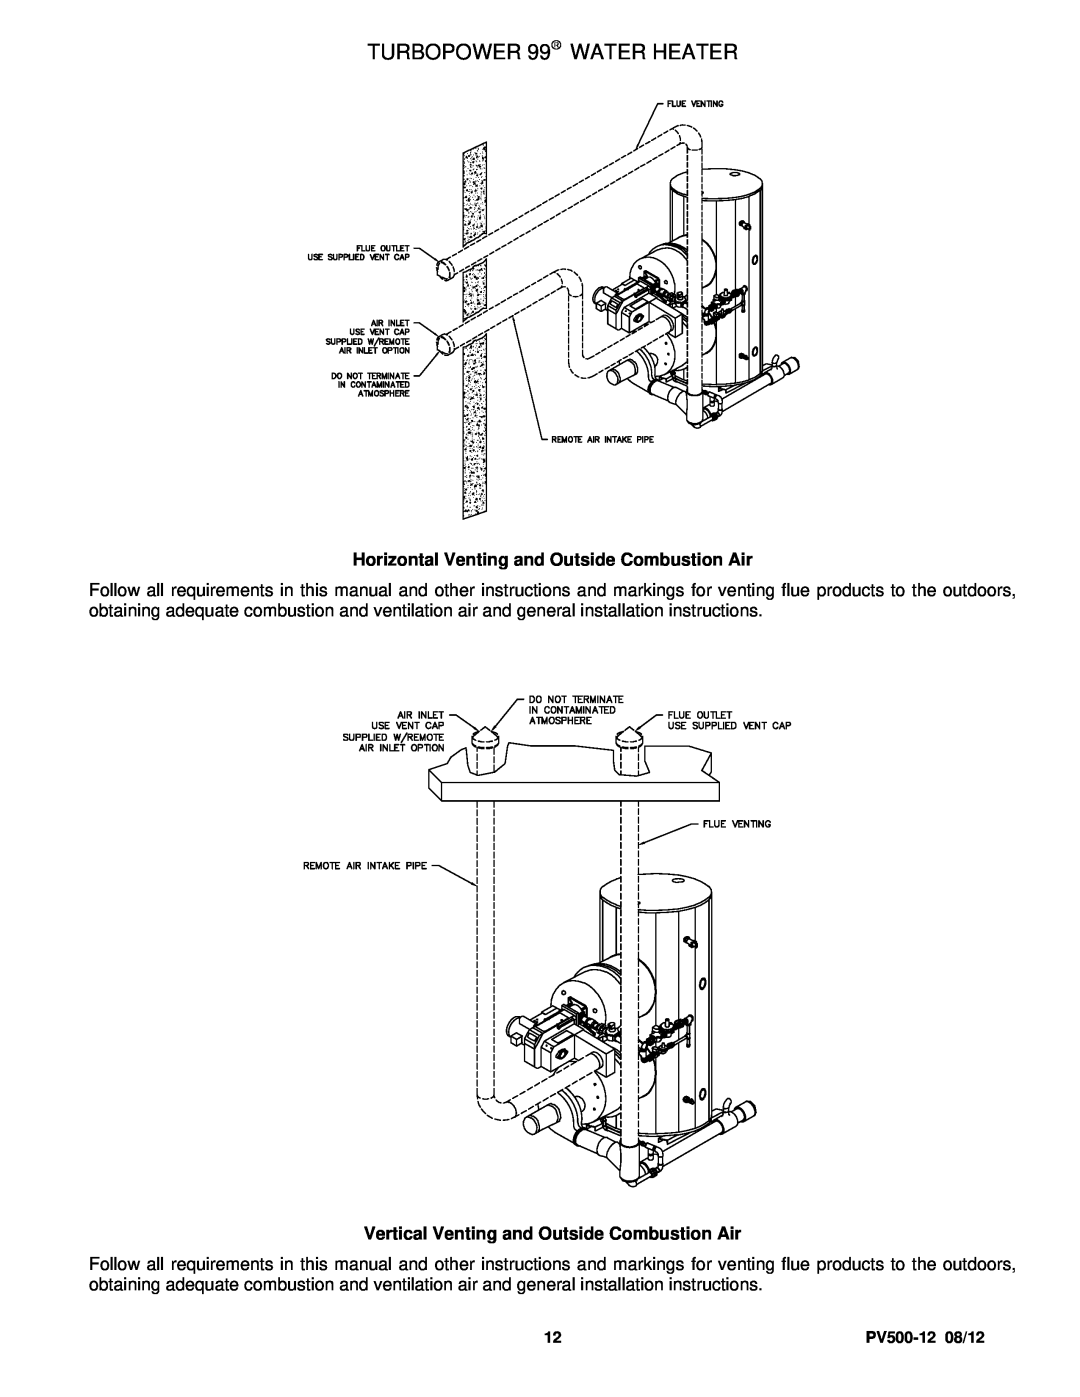 PVI Industries PV500-12 manual TURBOPOWER 99 WATER HEATER, Horizontal Venting and Outside Combustion Air 